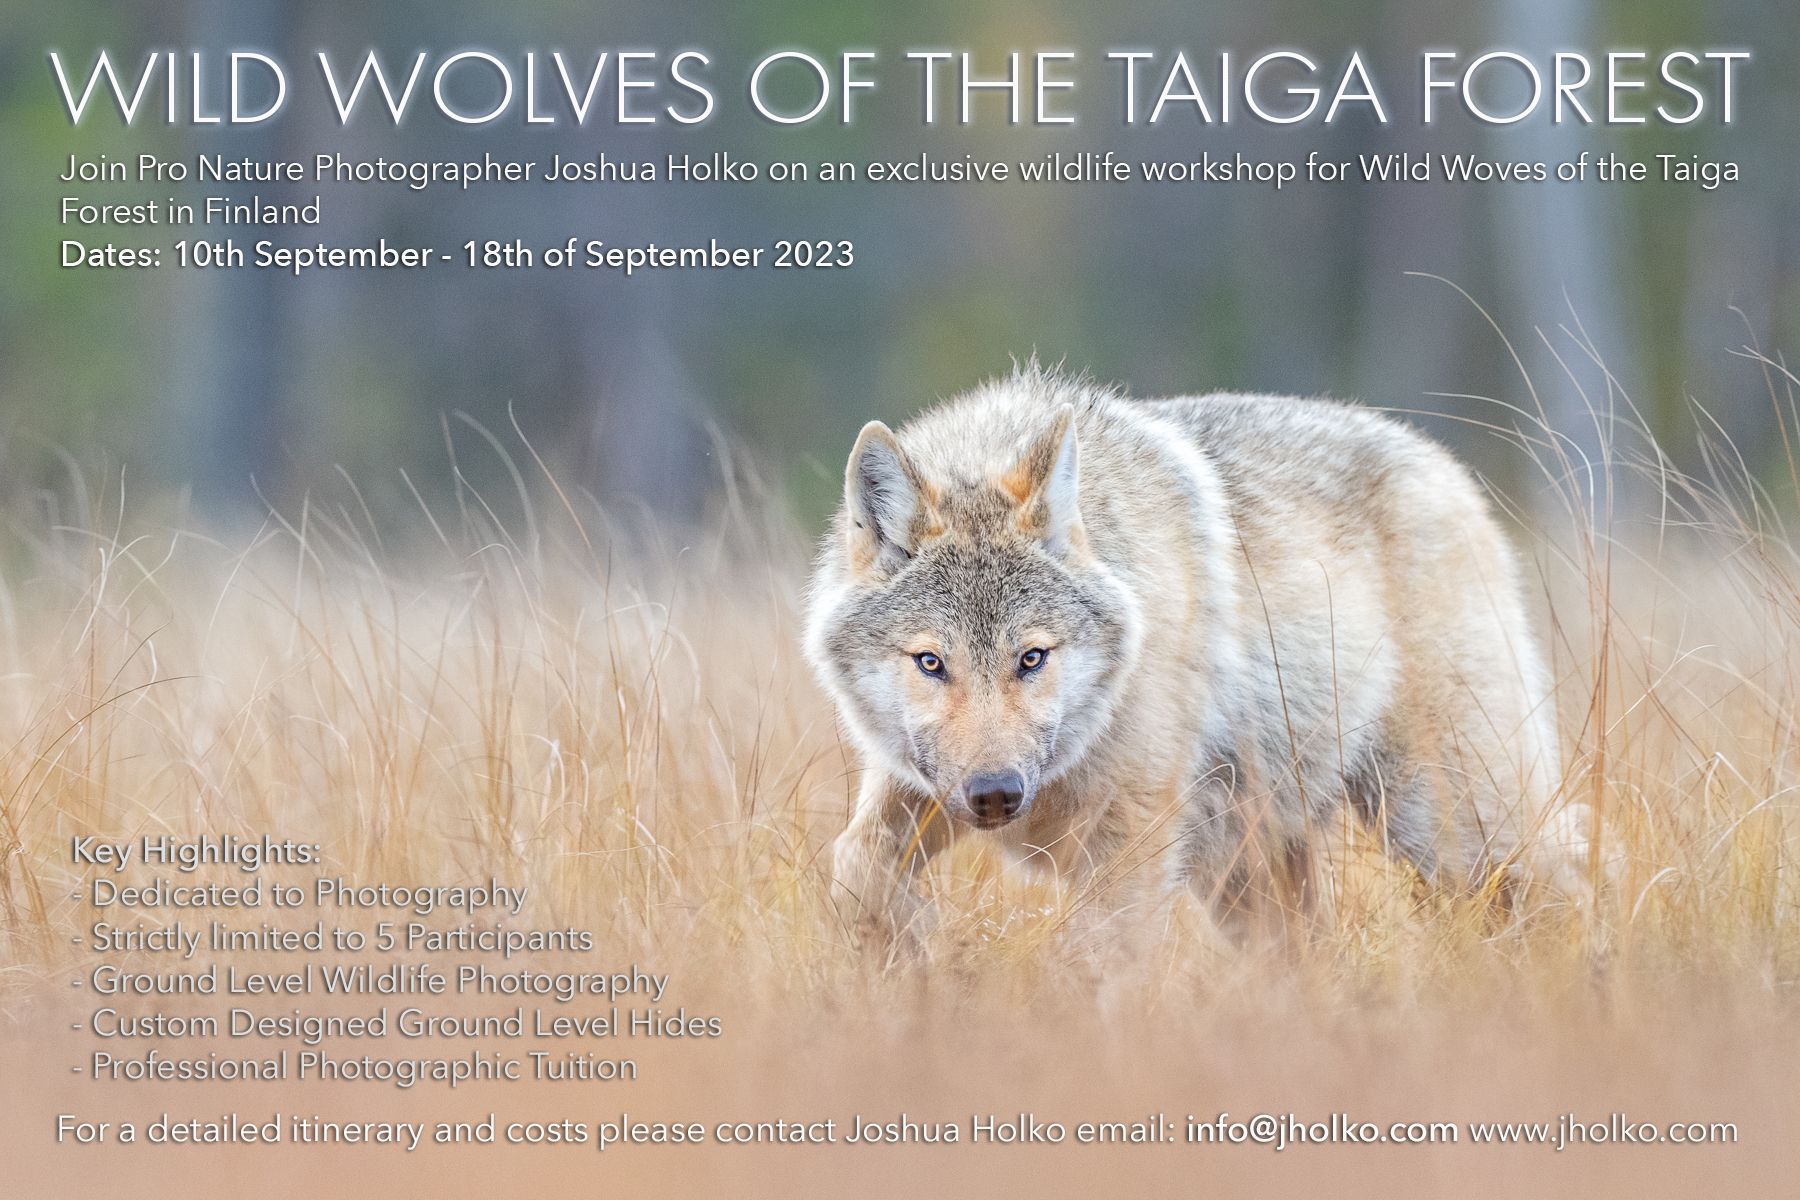 Wild Wolves of the Taiga Forest